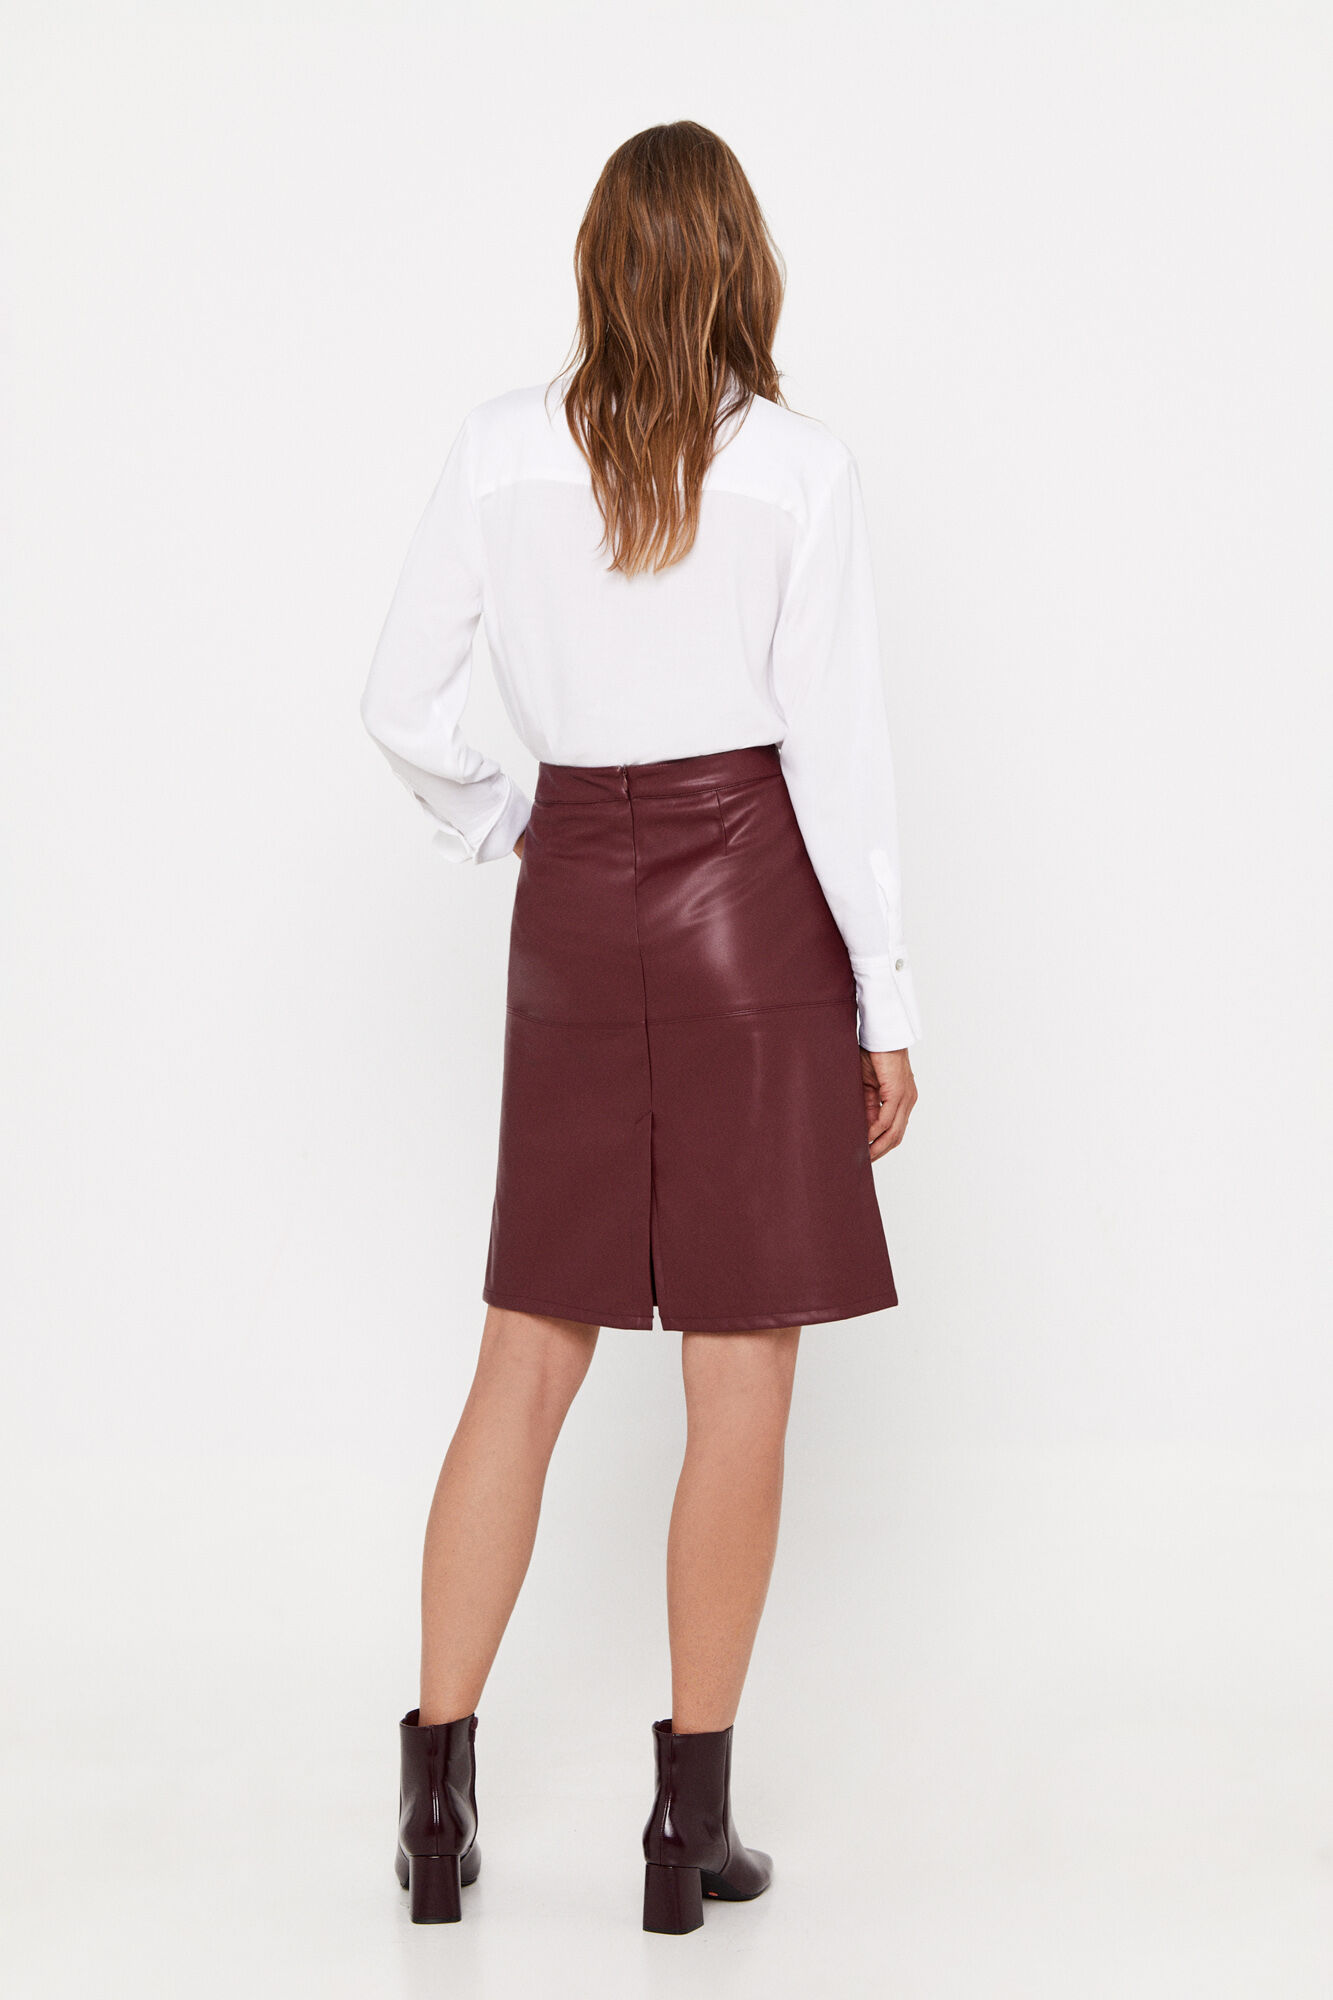 Missguided Burgundy Faux Leather Asymmetric Eyelet Detail Mini Skirt, $42 |  Missguided | Lookastic